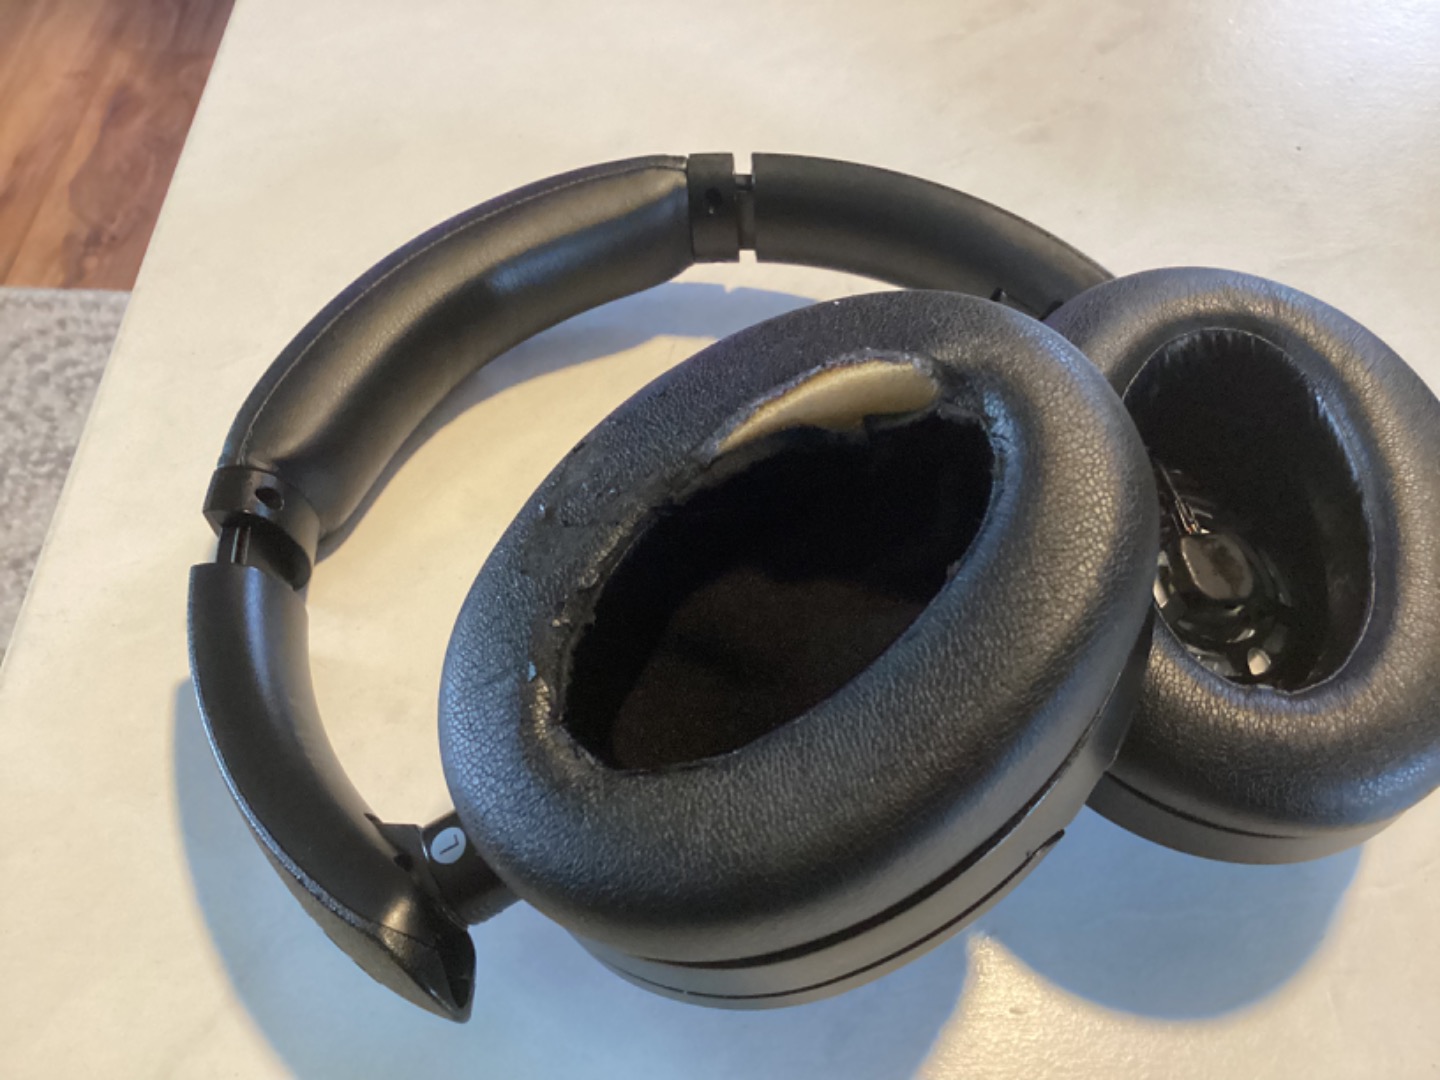 Sony WH-XB910N NC Headphones: All about that Bass // Unboxing & Review 